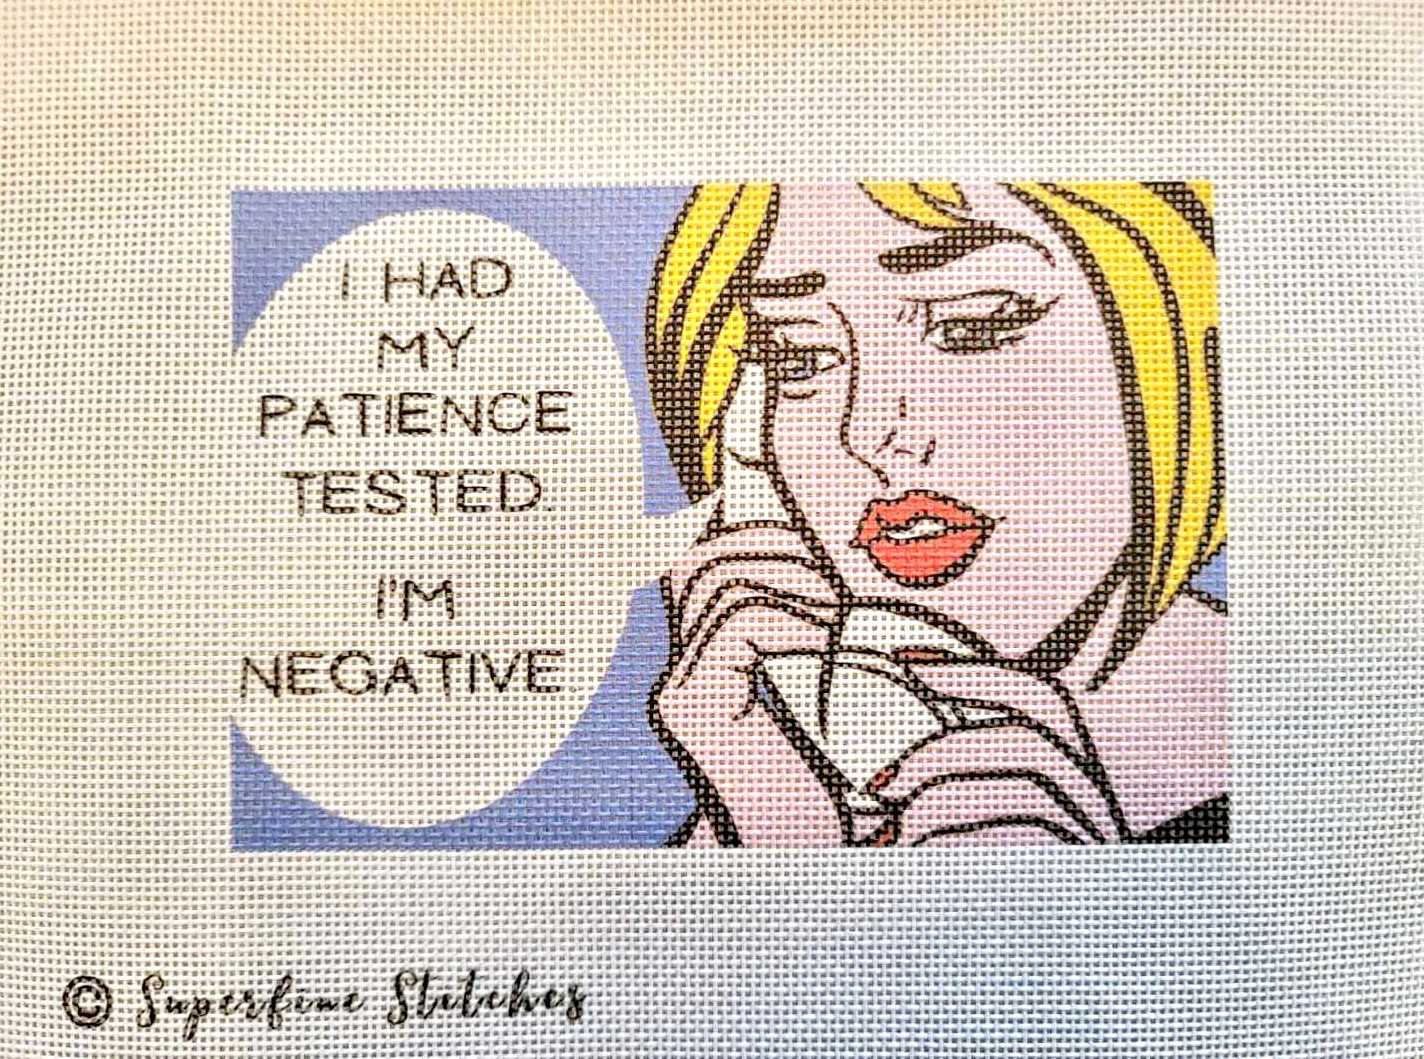 I Had My Patience Tested needlepoint kit with silk threads, 6" x 4" on 18 mesh.